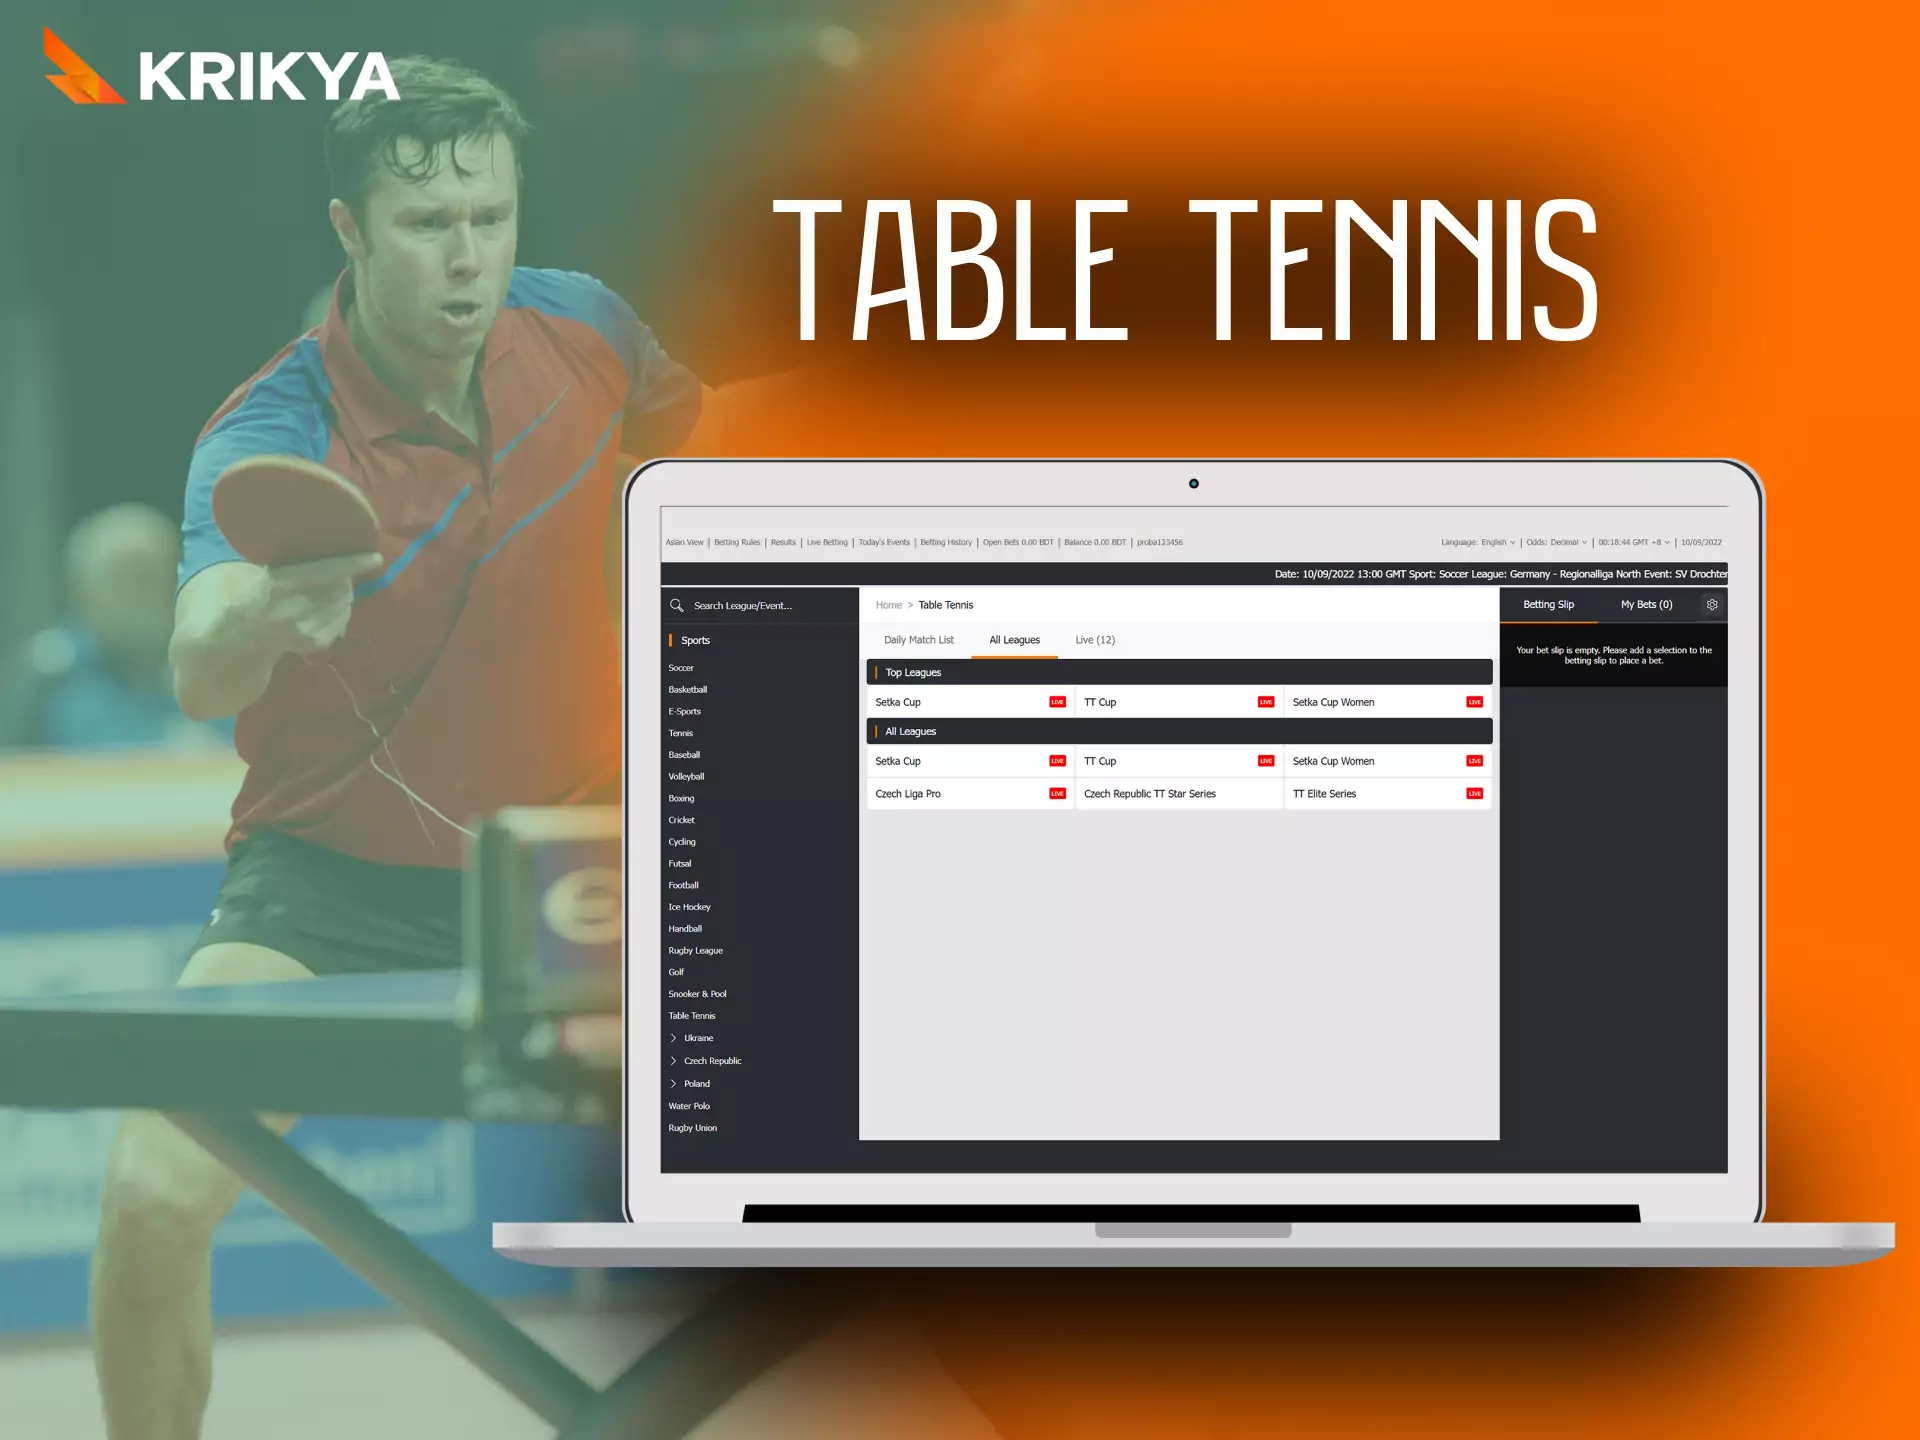 On Krikya, place bets on various table tennis sports events.